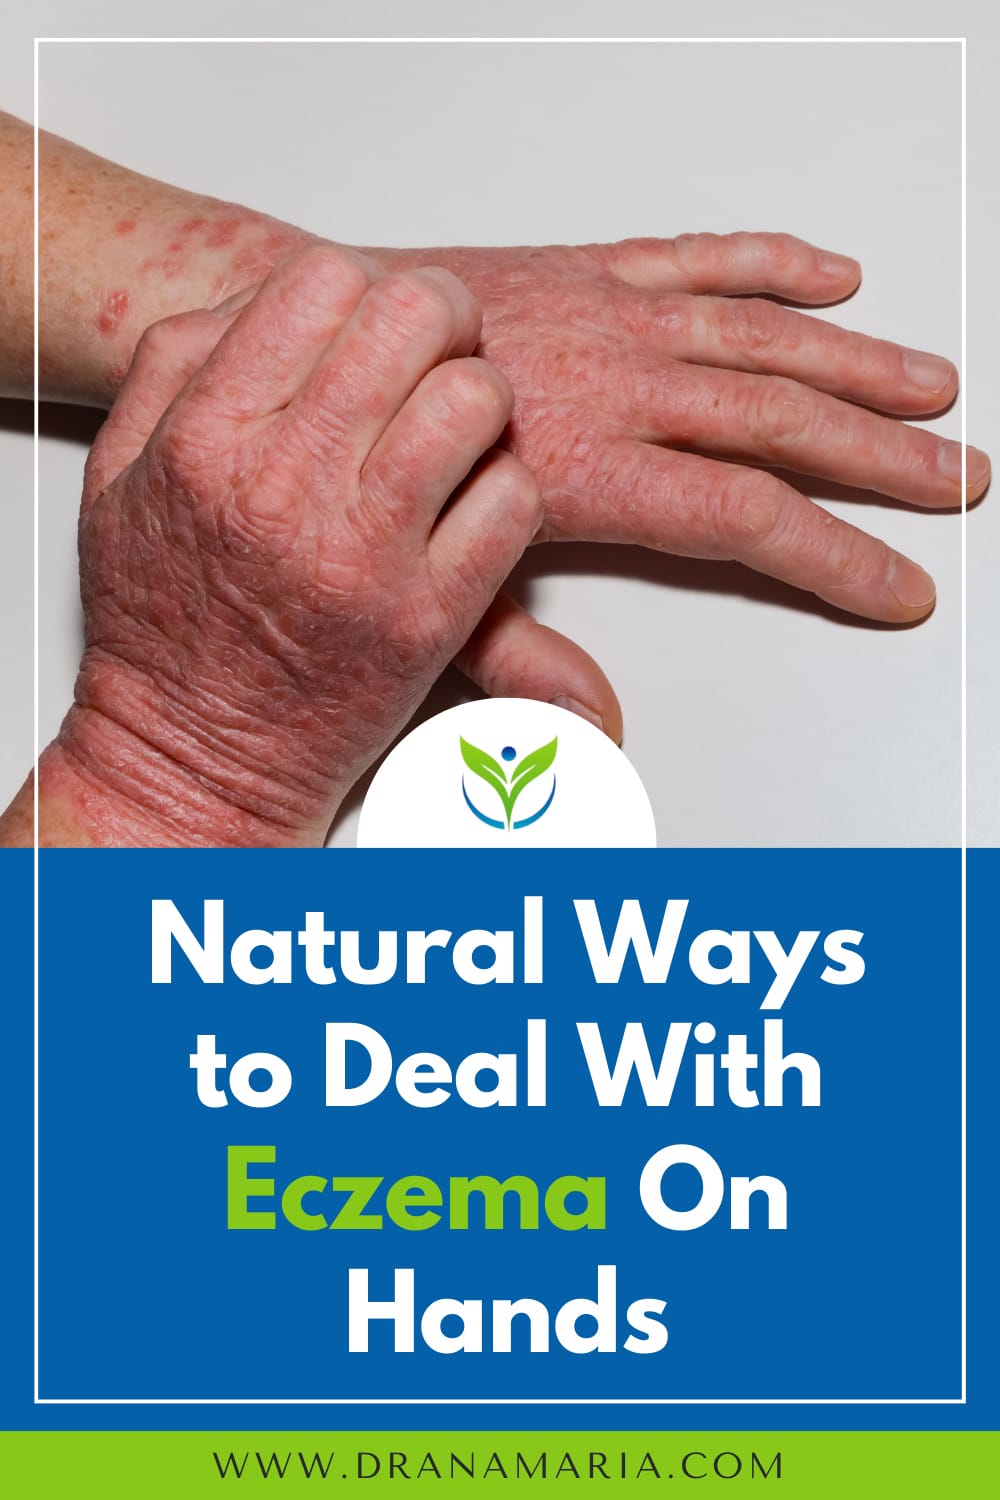 Natural Ways To Deal With Eczema On Hands